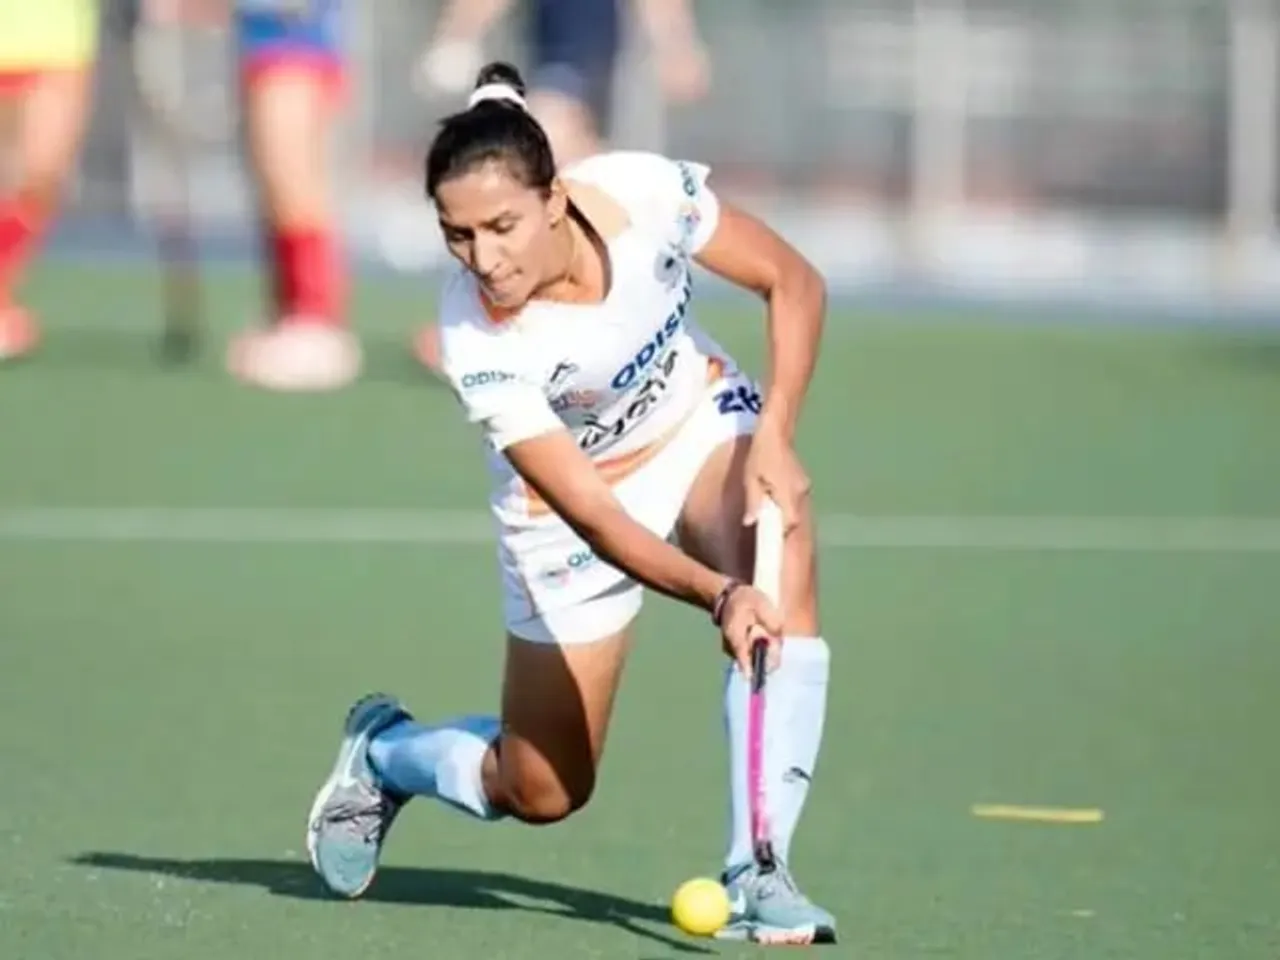 Rani Rampal Misses Out As India Name FIH Women's Hockey World Cup Squad